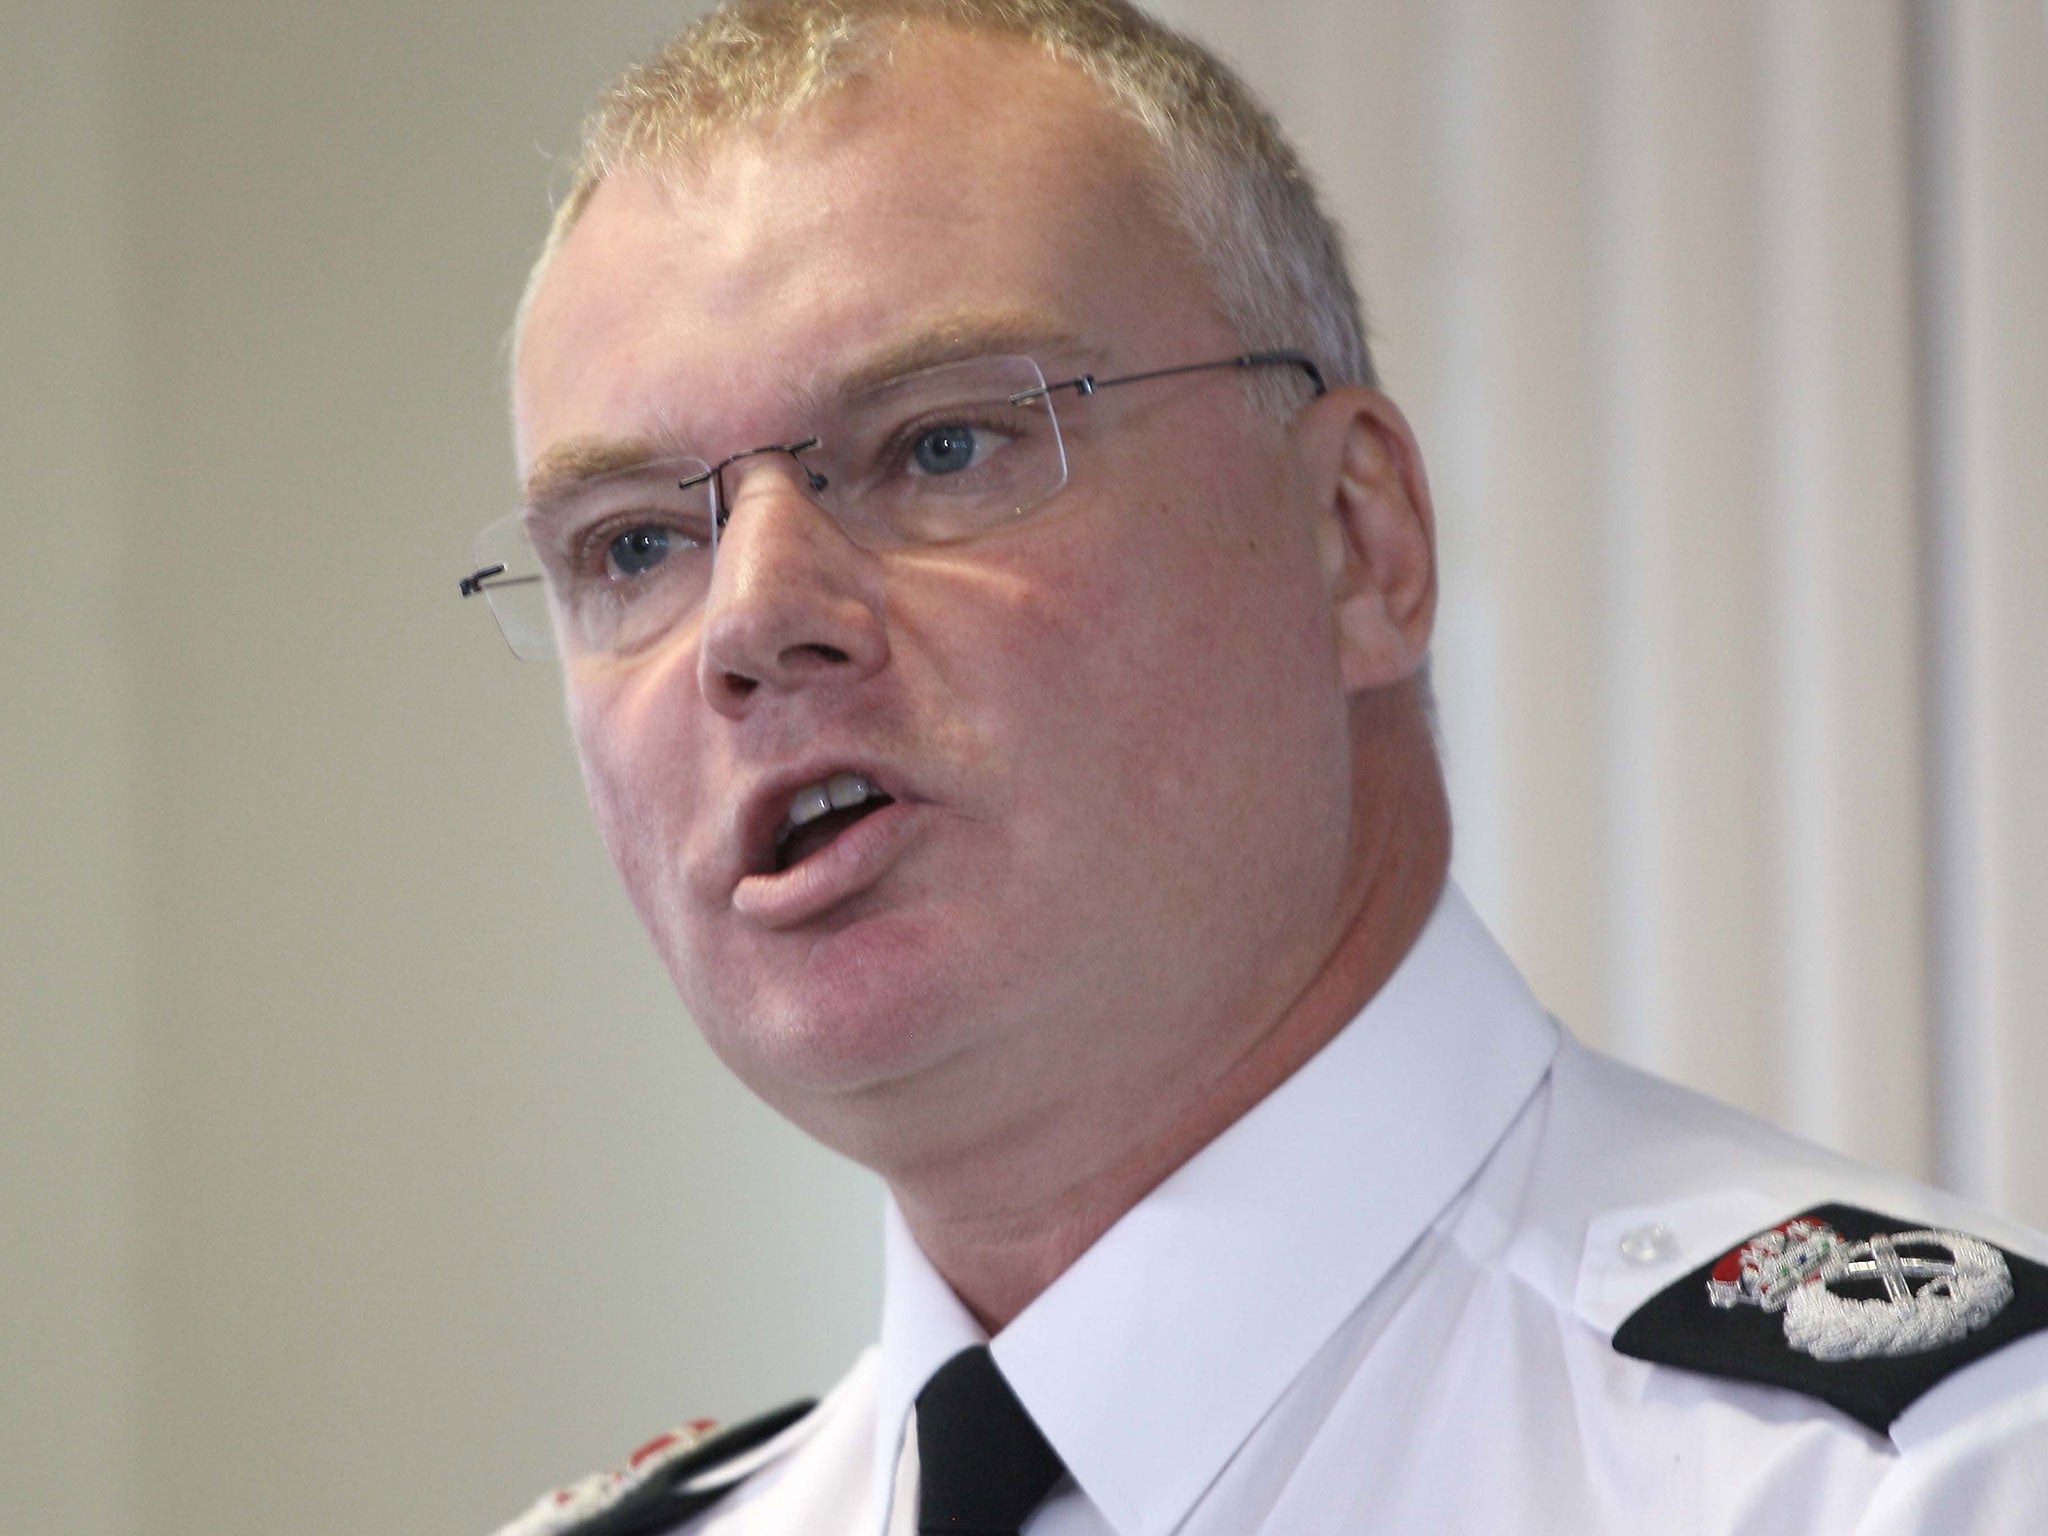 Mike Veale, chief constable of Wiltshire Police, speaks to the media about Operation Conifer on 5 October